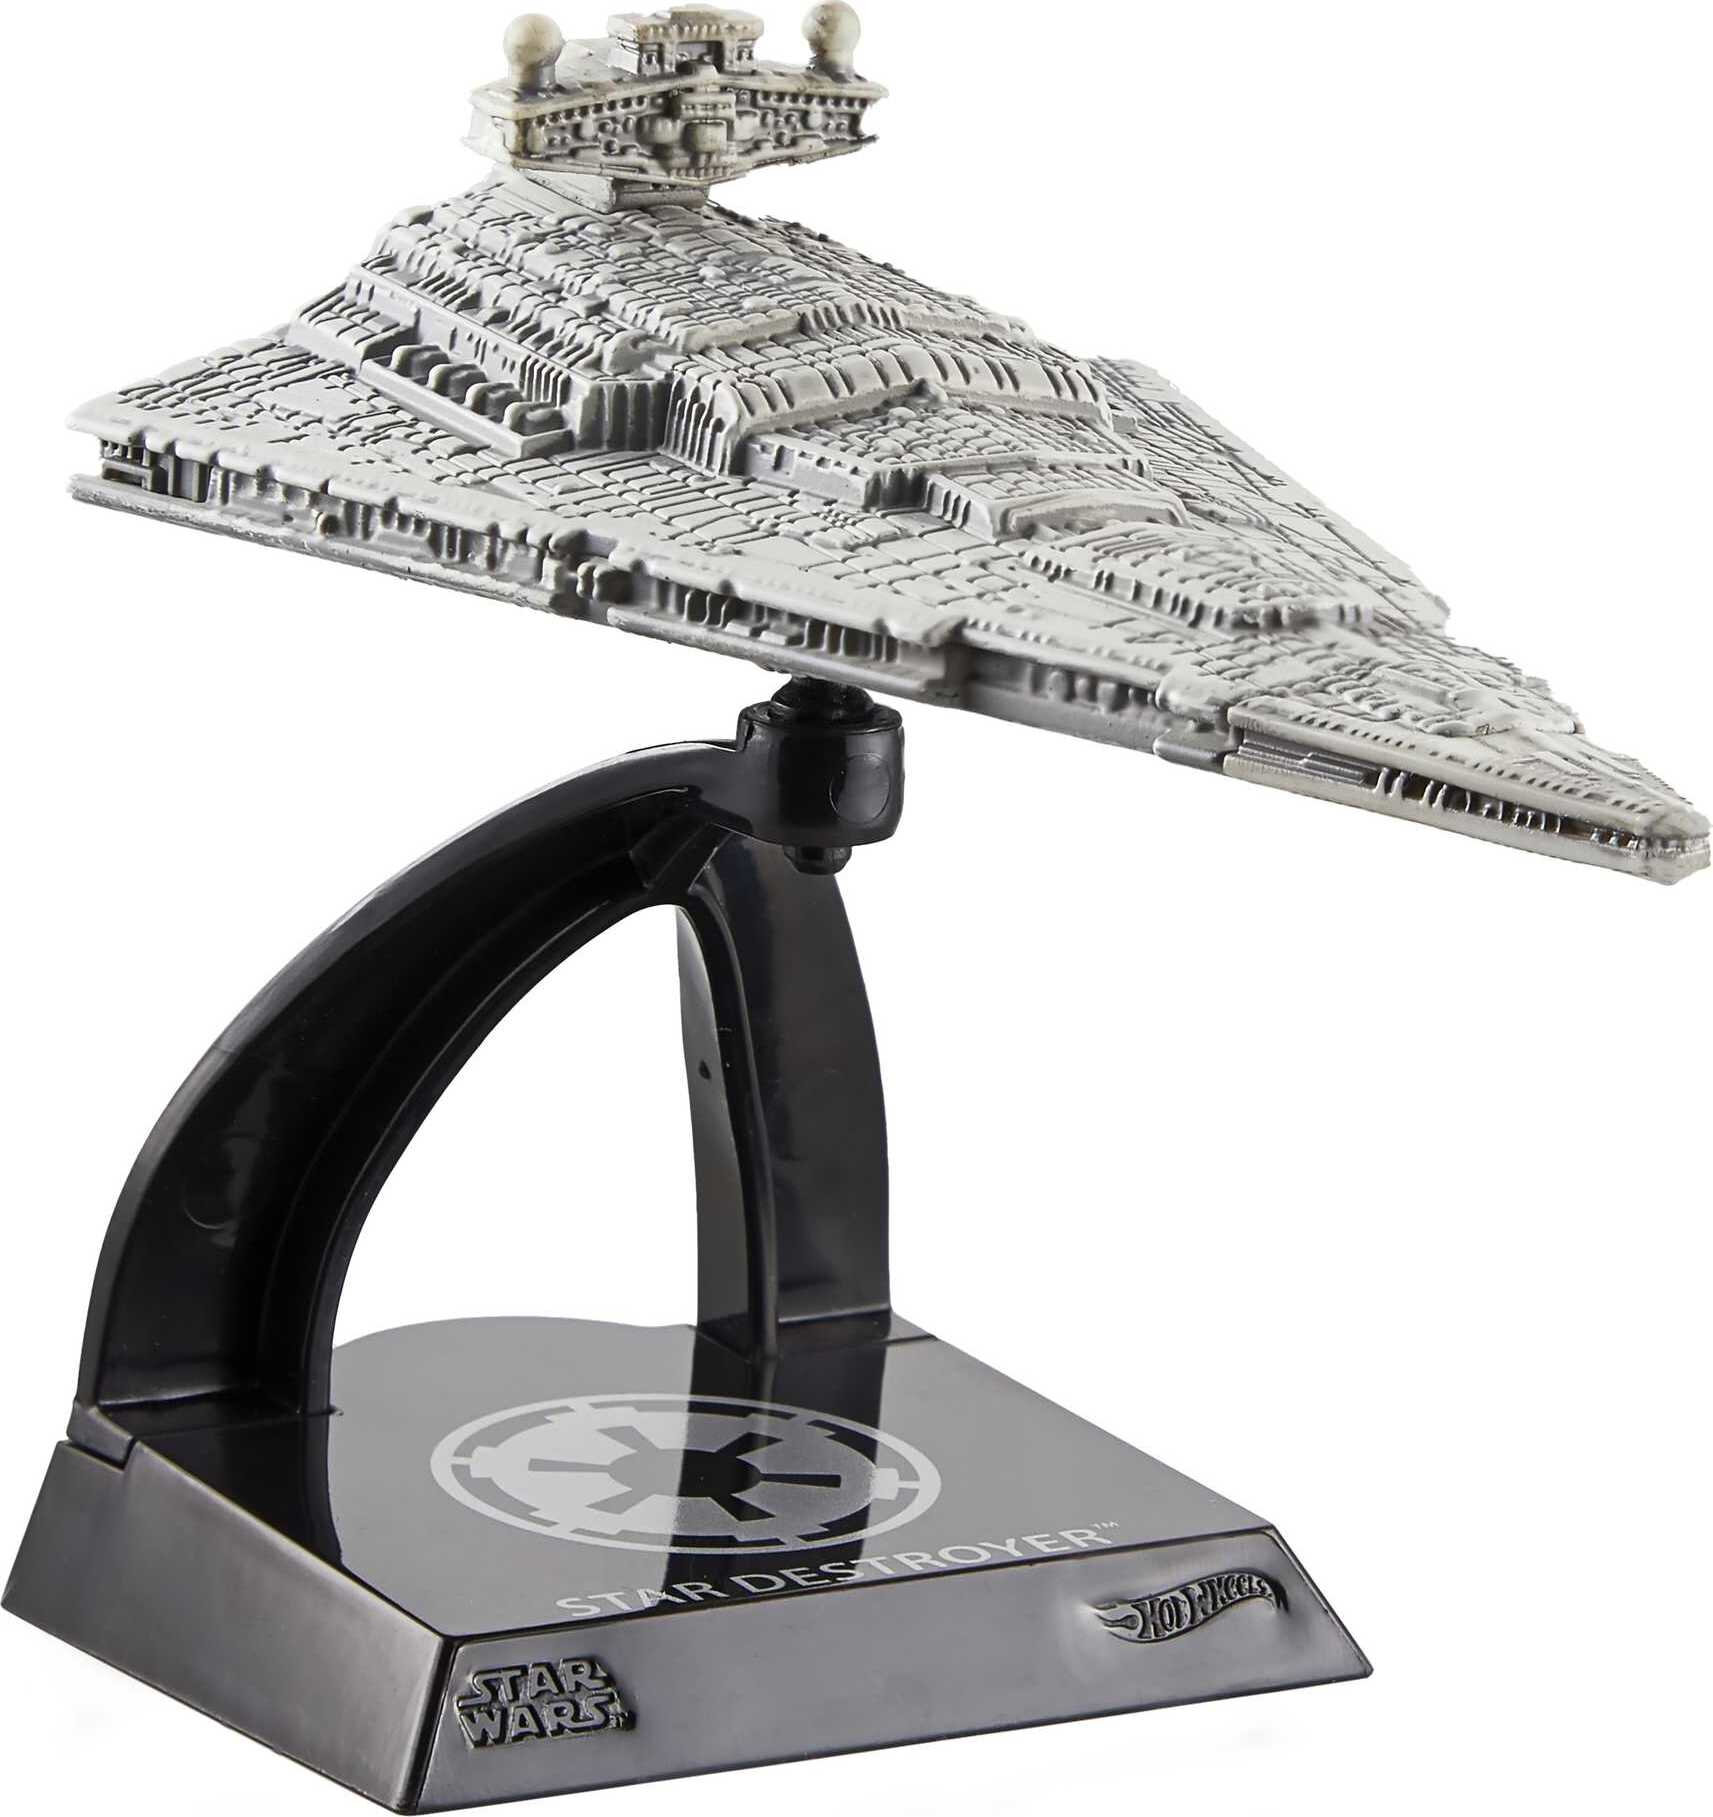 Hot Wheels Star Wars Starships Select, Premium Replica, Gift For Adults Collectors - image 1 of 5